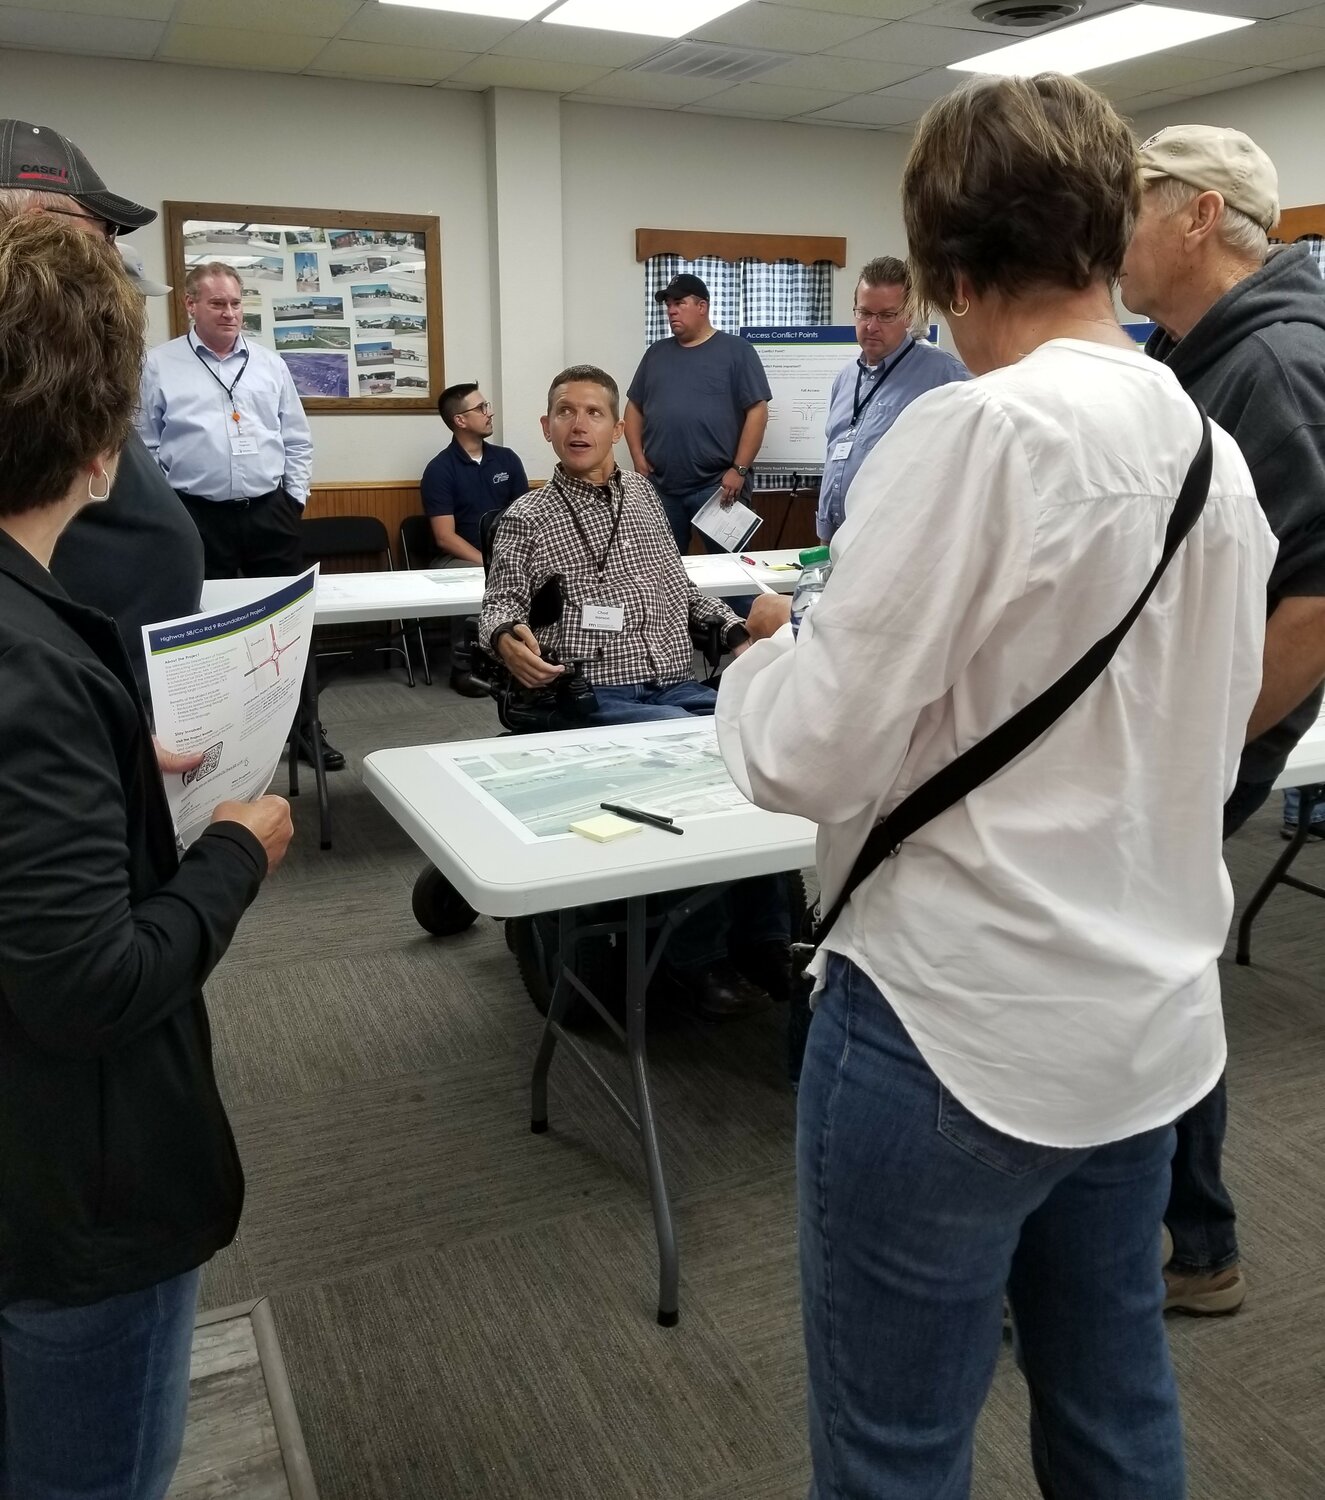 Project Manager, Chad Hanson, answers questions posed by area residents about the planned roundabout at the Highways 58 and 9 intersection.